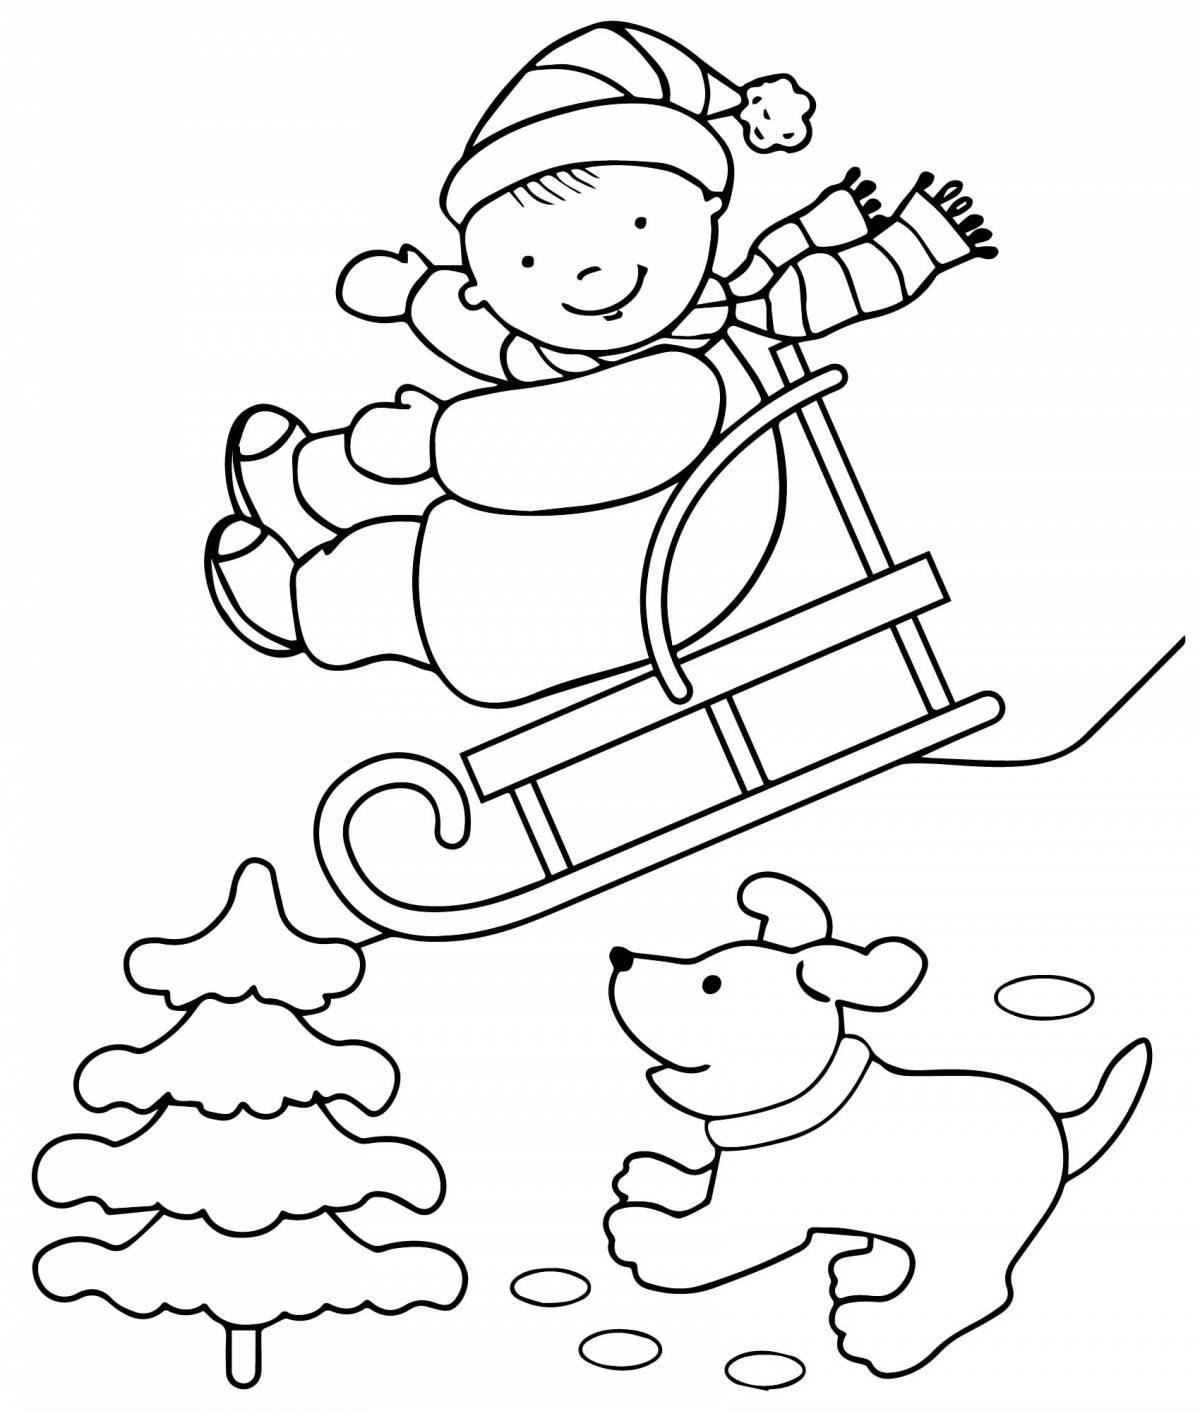 Holiday sleigh coloring book for 3-4 year olds